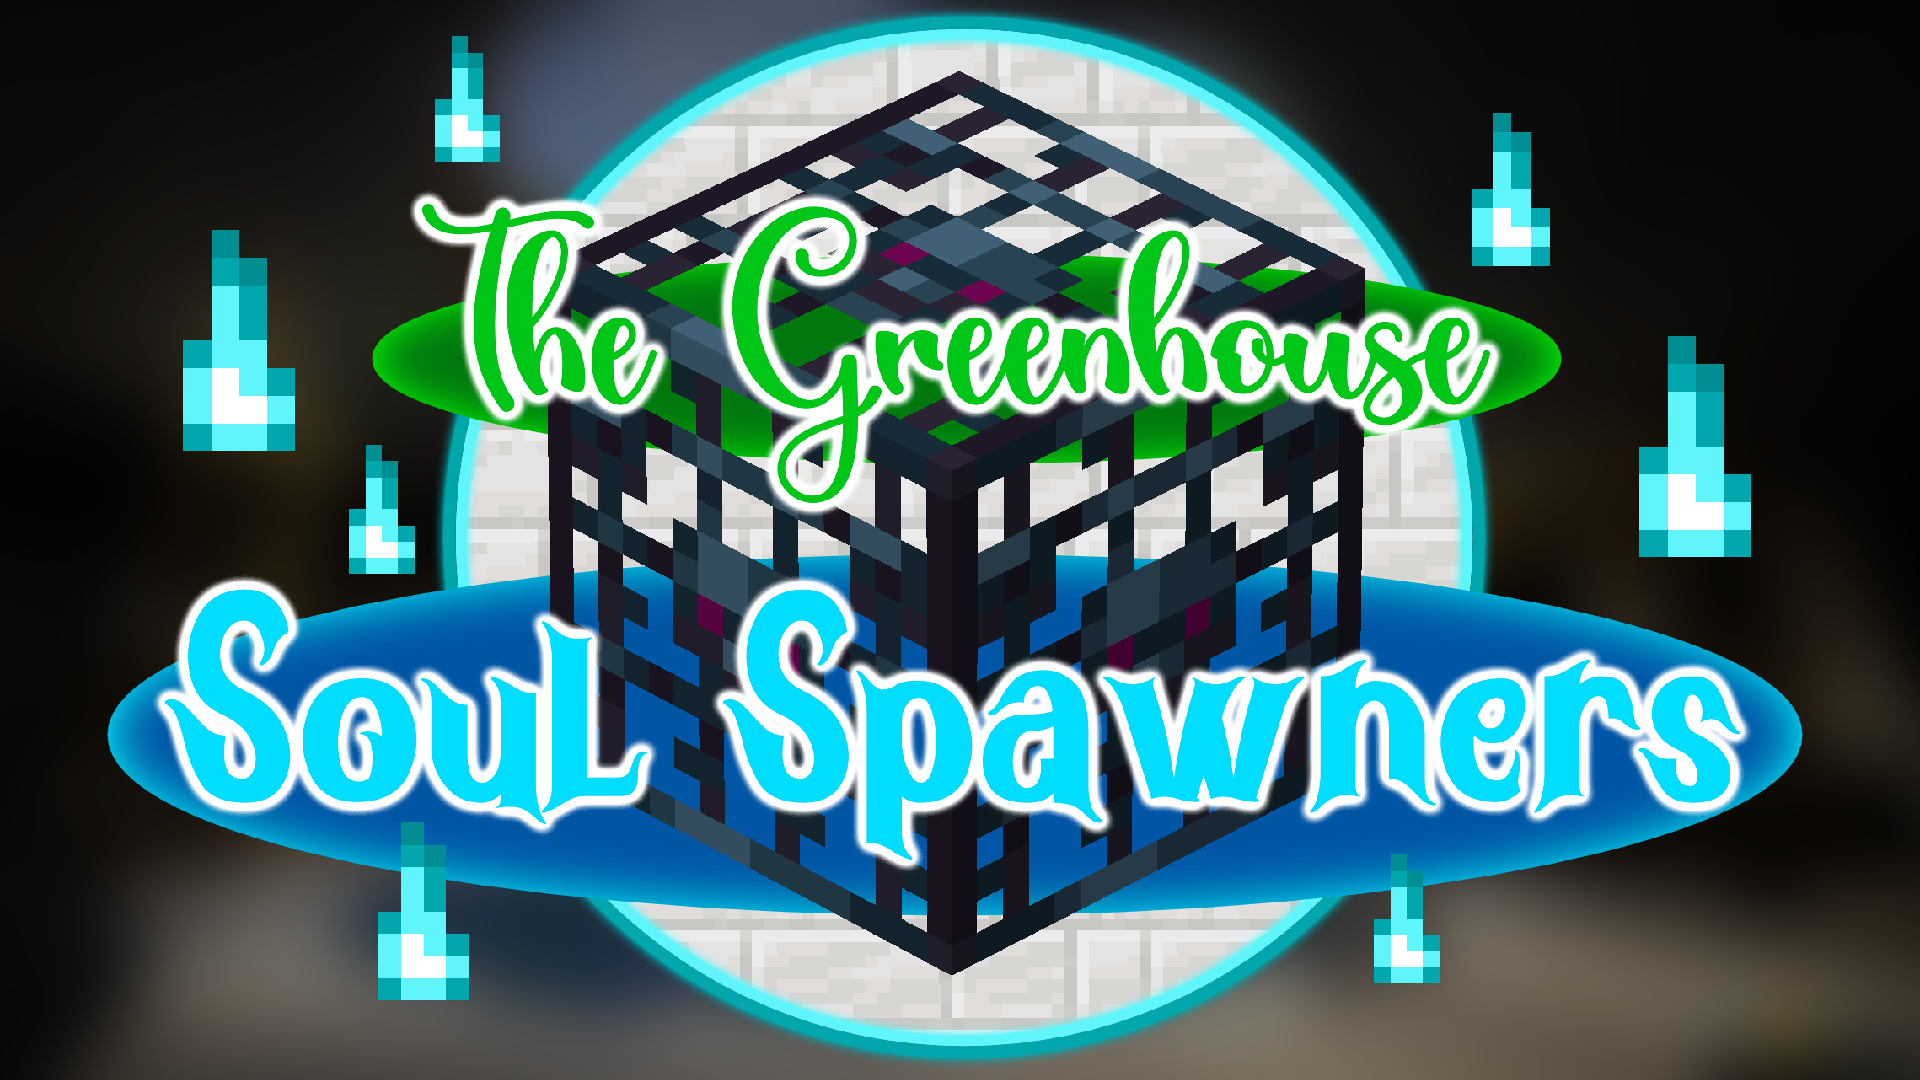 Download The Greenhouse Soul Spawners for Minecraft 1.17